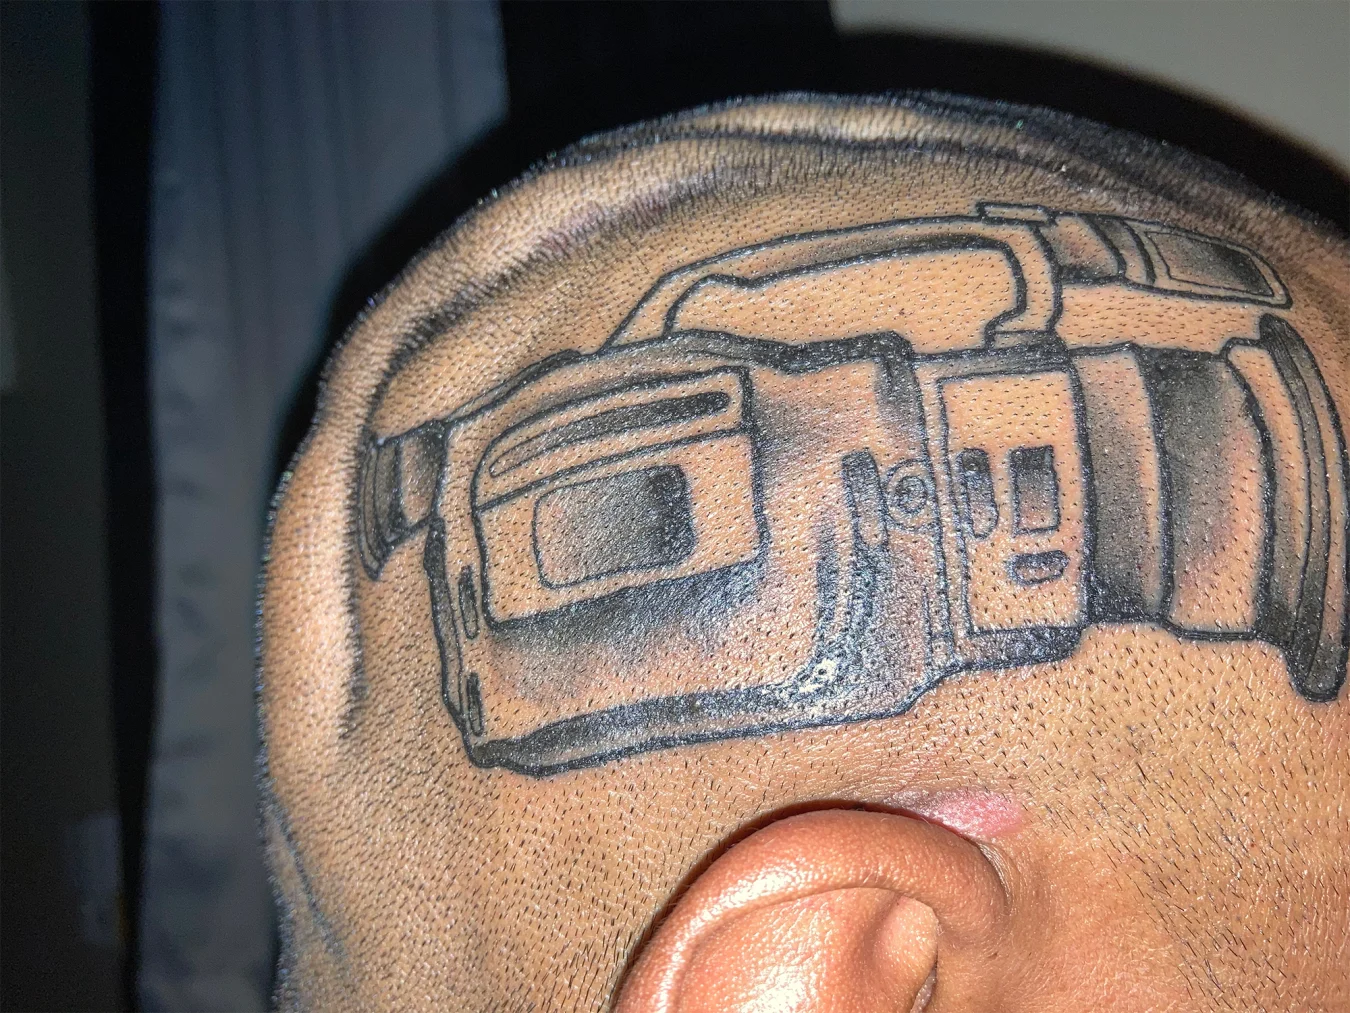 A man with a tattoo of a Sony VX1000 video camera on his head.